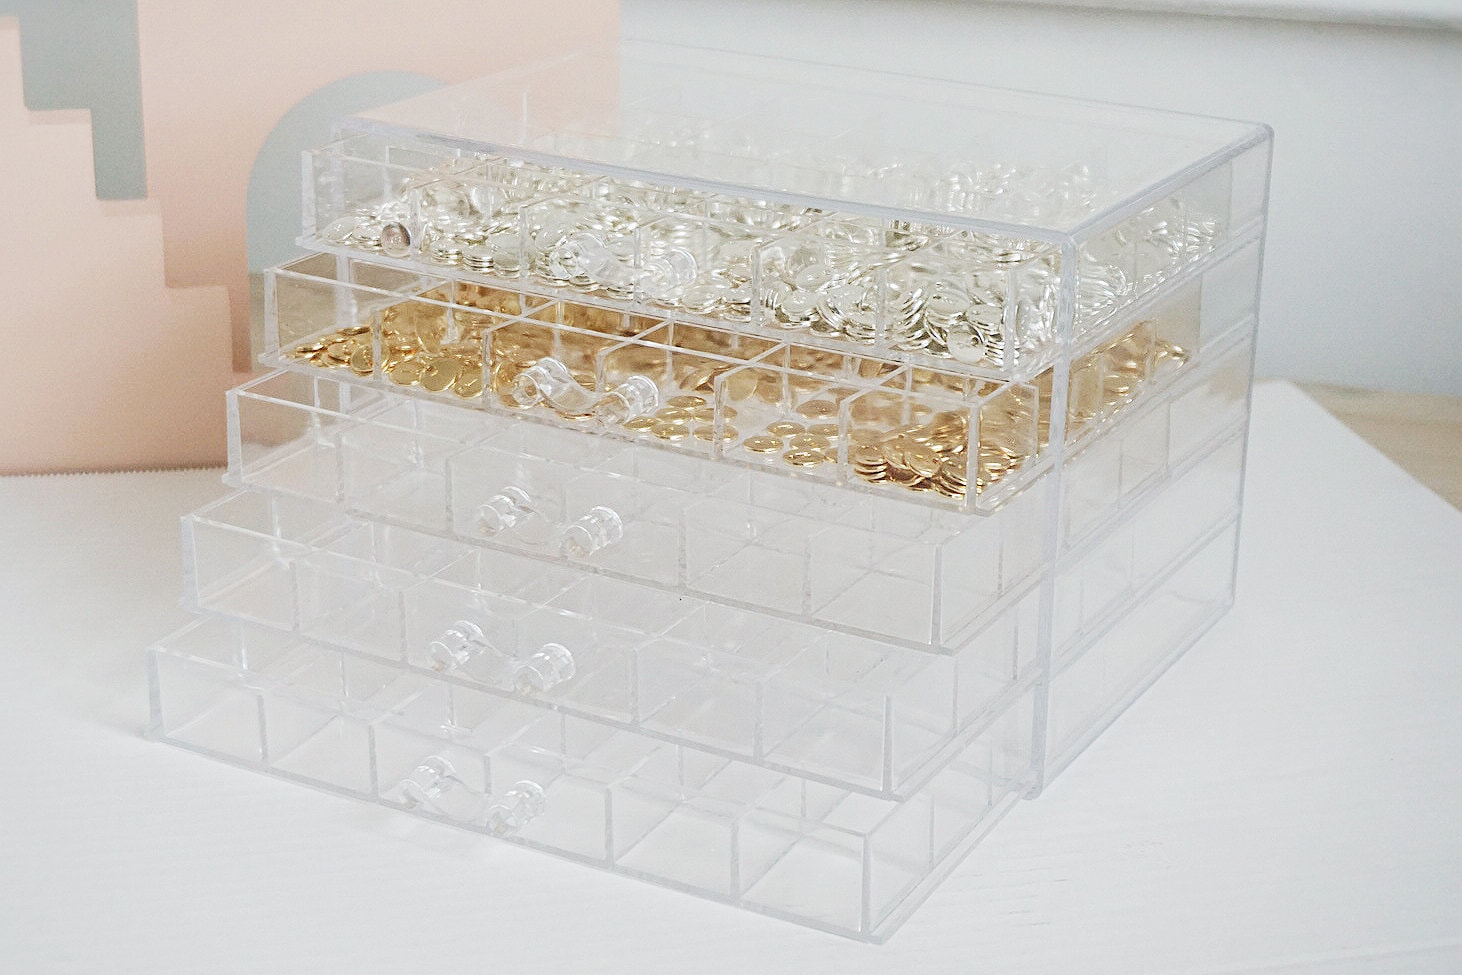 4 X 4 X 2 Clear Plastic Display or Storage Box Made in USA free Shipping 6  Pieces Included 